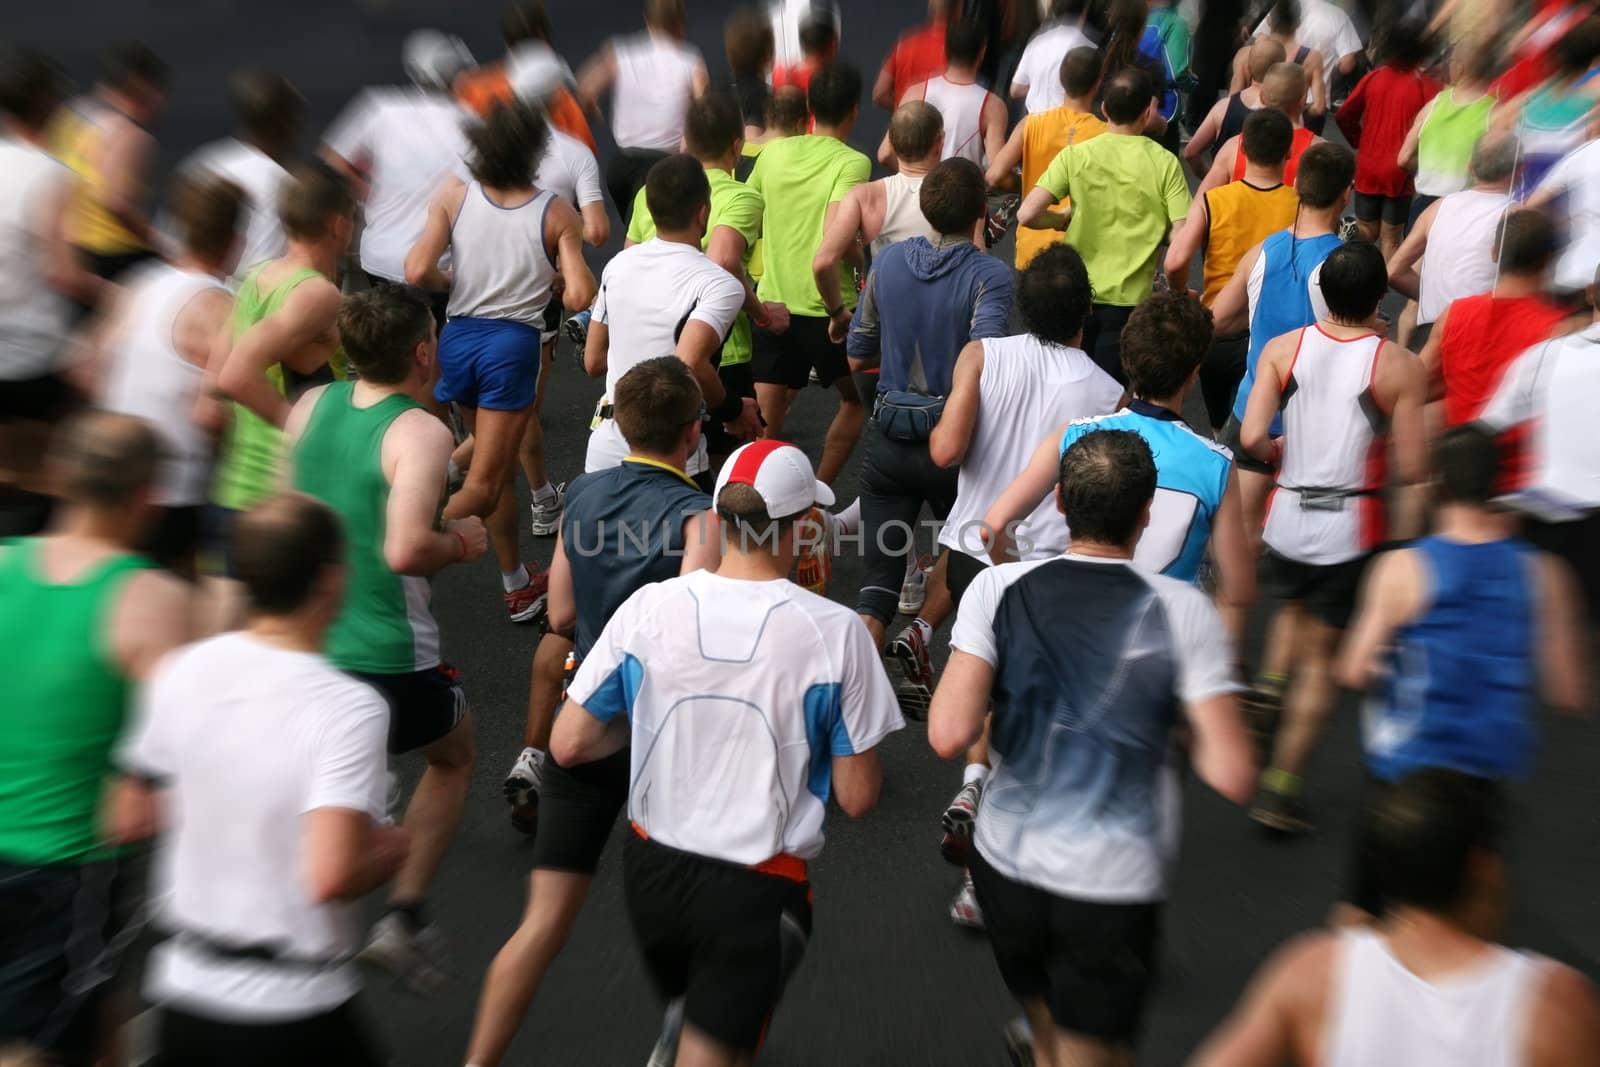 joggers racing a marathon competition